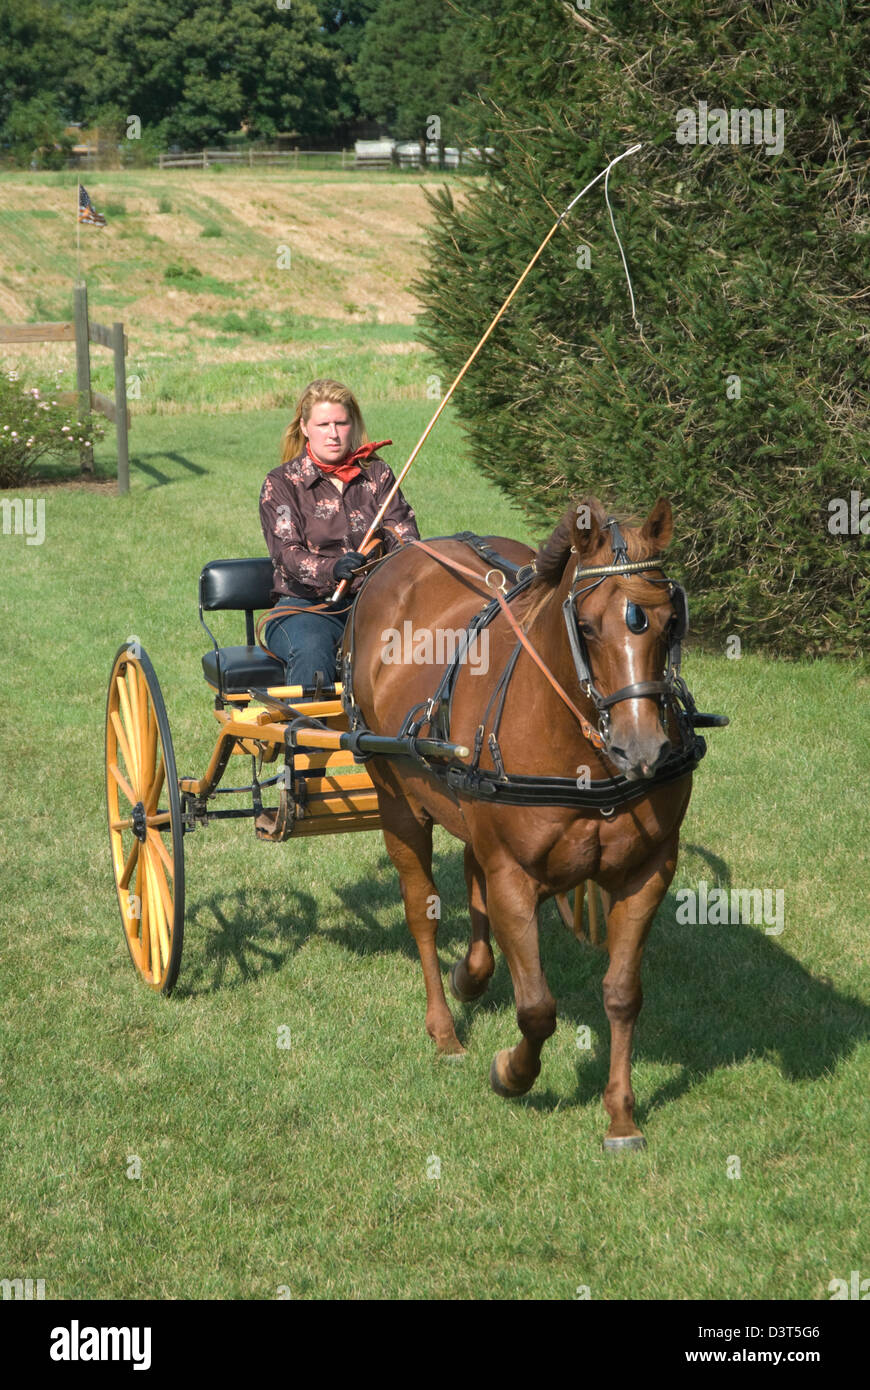 Woman driving a horse drawn buggy outdoors in grassy field in summer sunlight, front view. Stock Photo